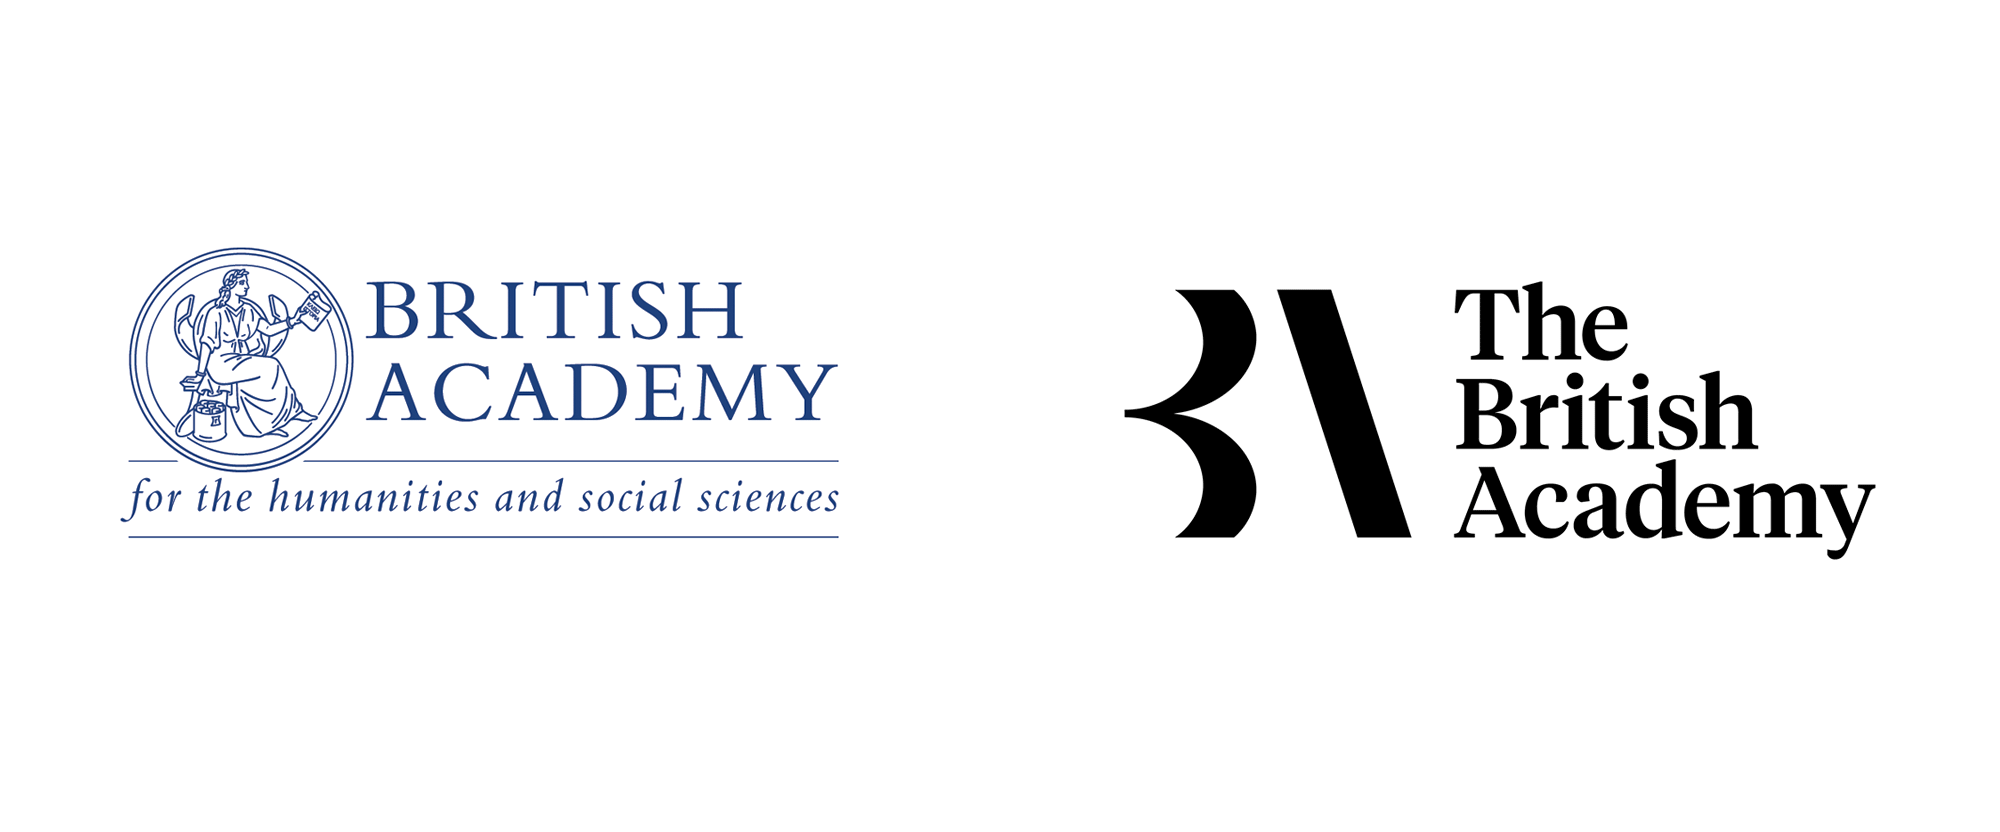 British Logo - Brand New: New Logo and Identity for The British Academy by Only